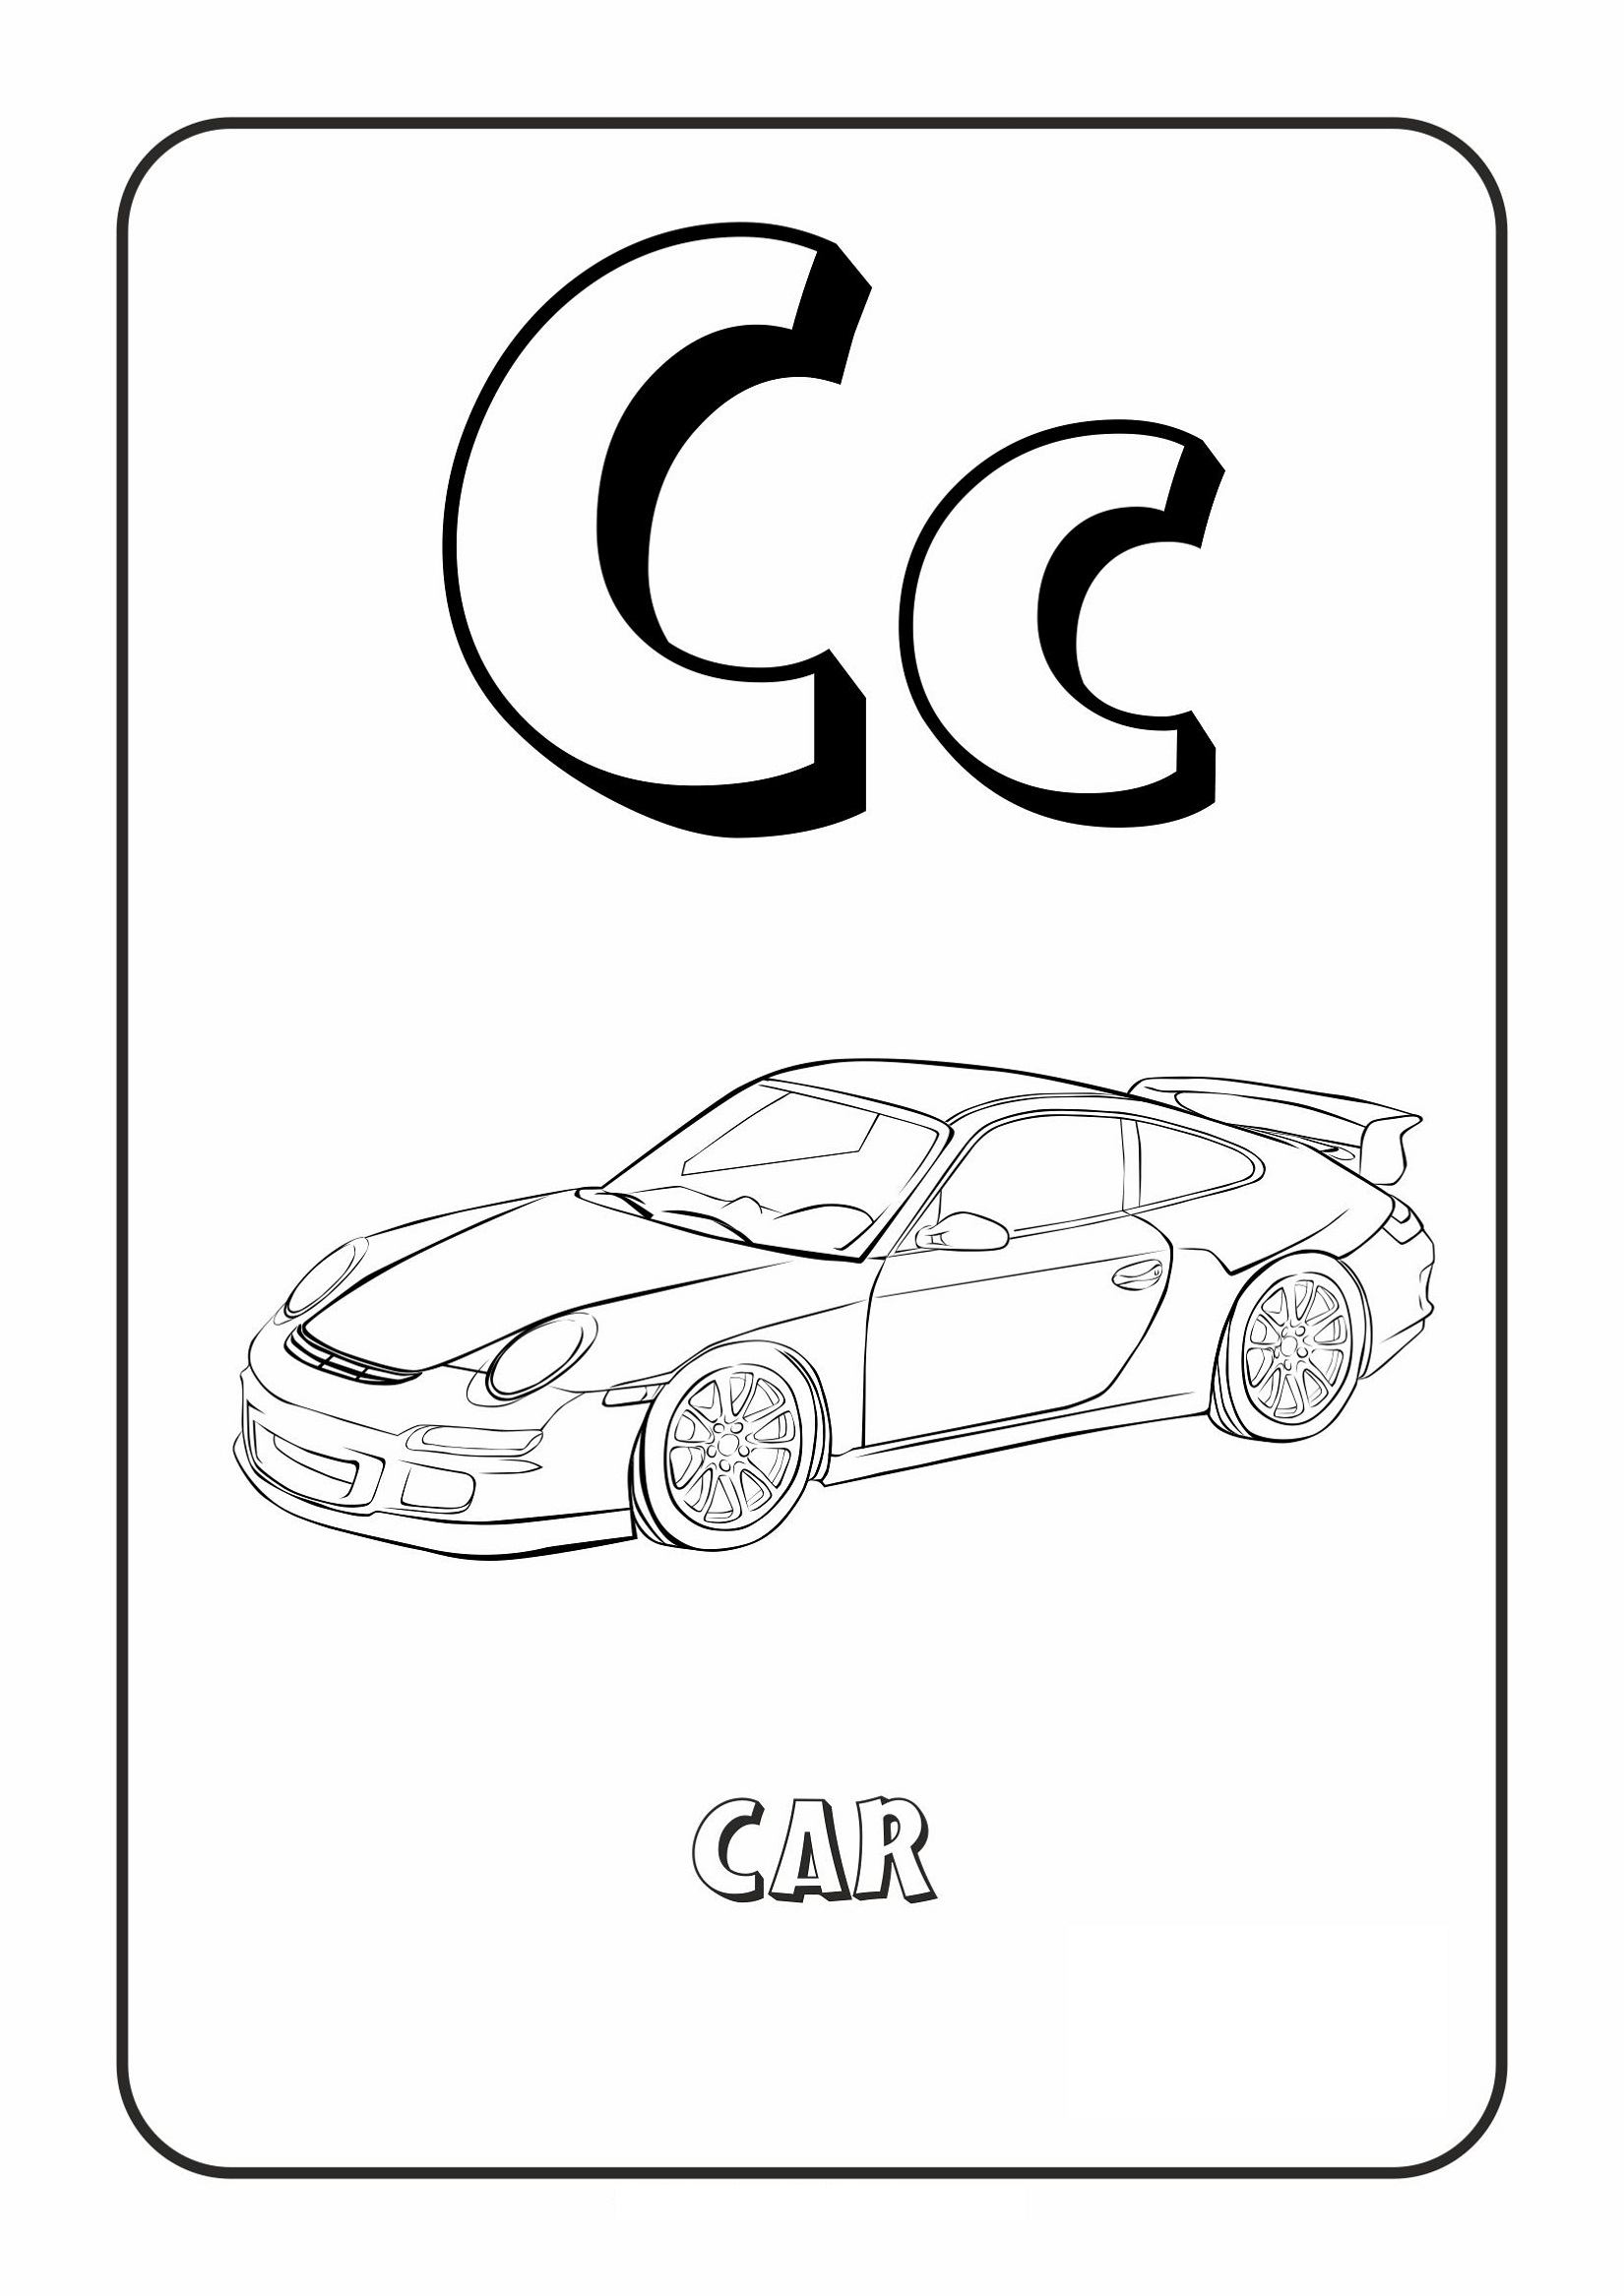 Alphabet Coloring Pages Free Car